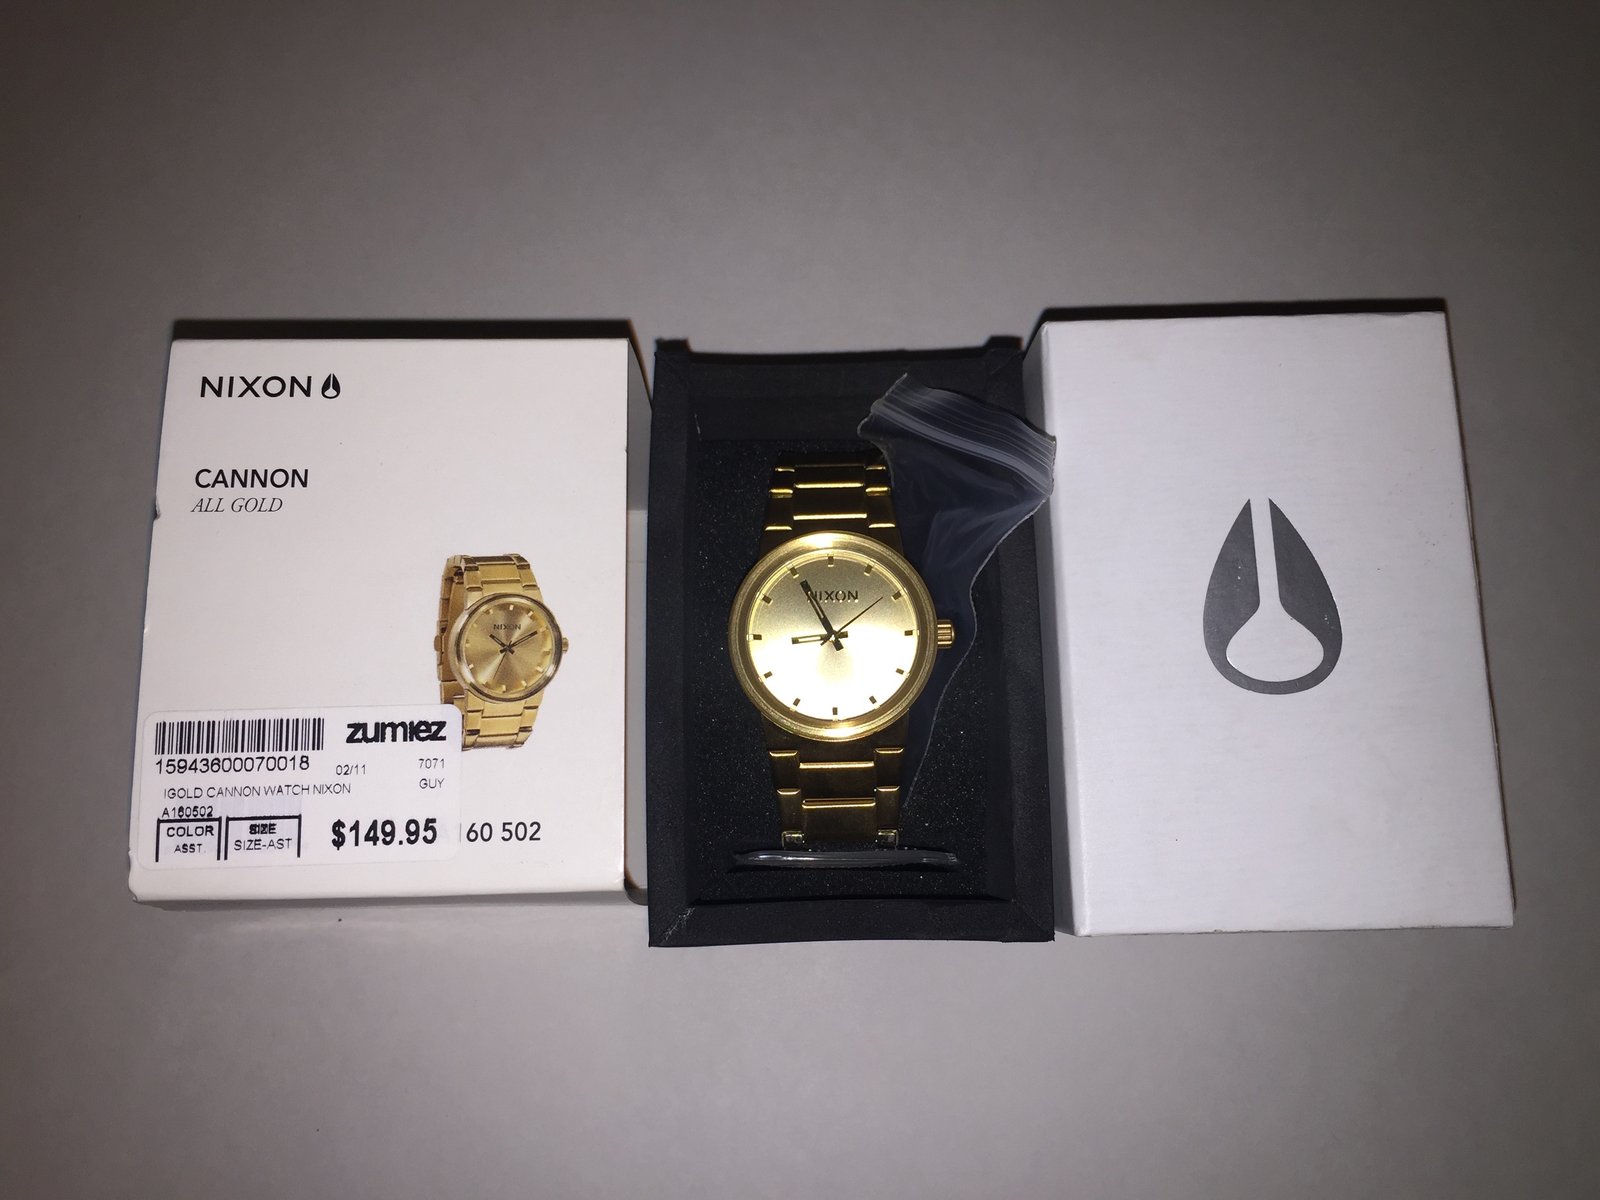 Best Nixon Cannon Watch for sale in Los Angeles, California for 2024